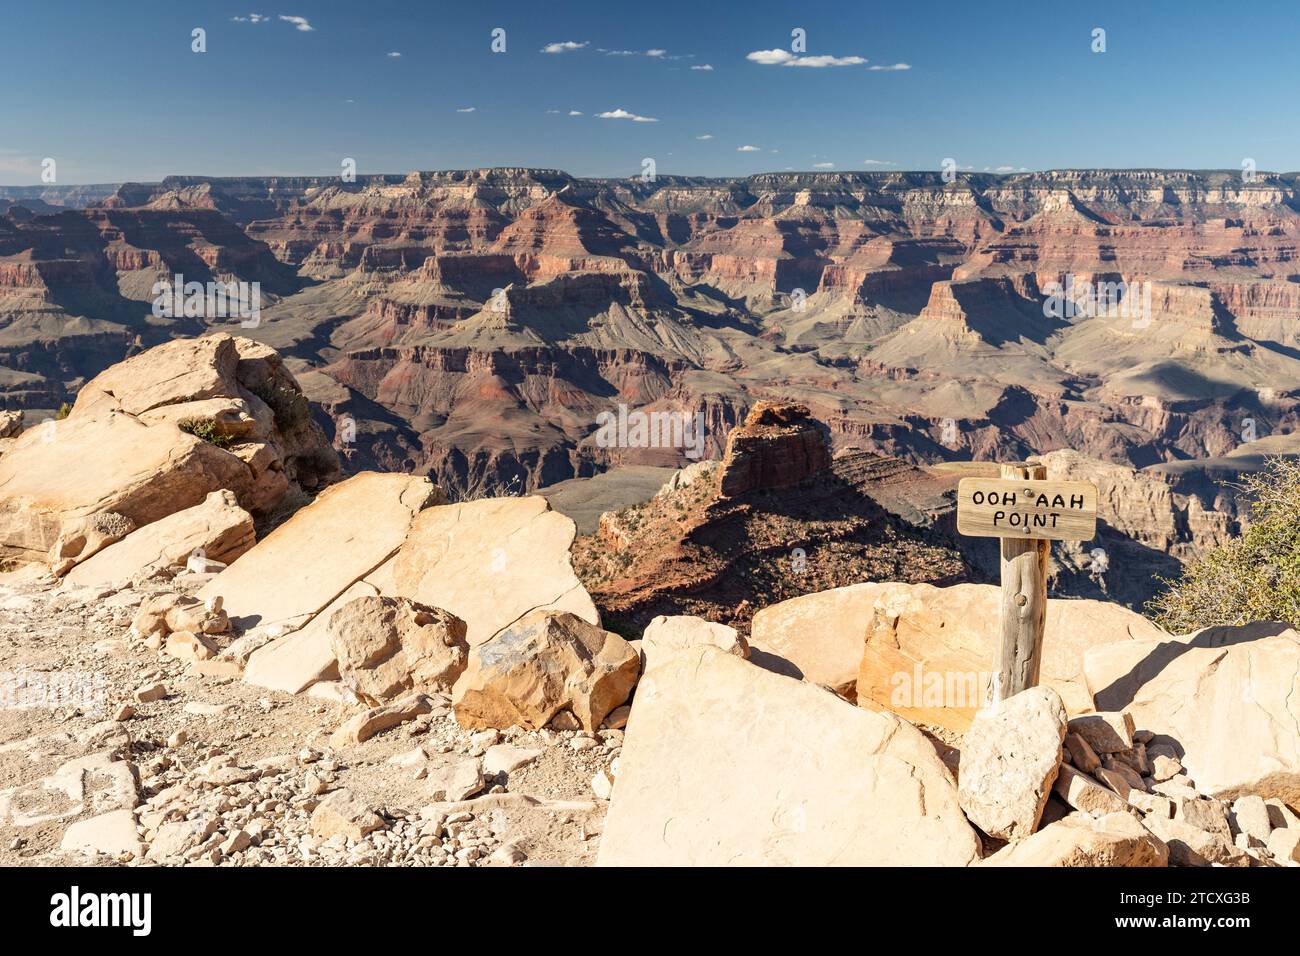 View from Ooh Aah Point along South Kaibab Trail, Grand Canyon, AZ, USA Stock Photo